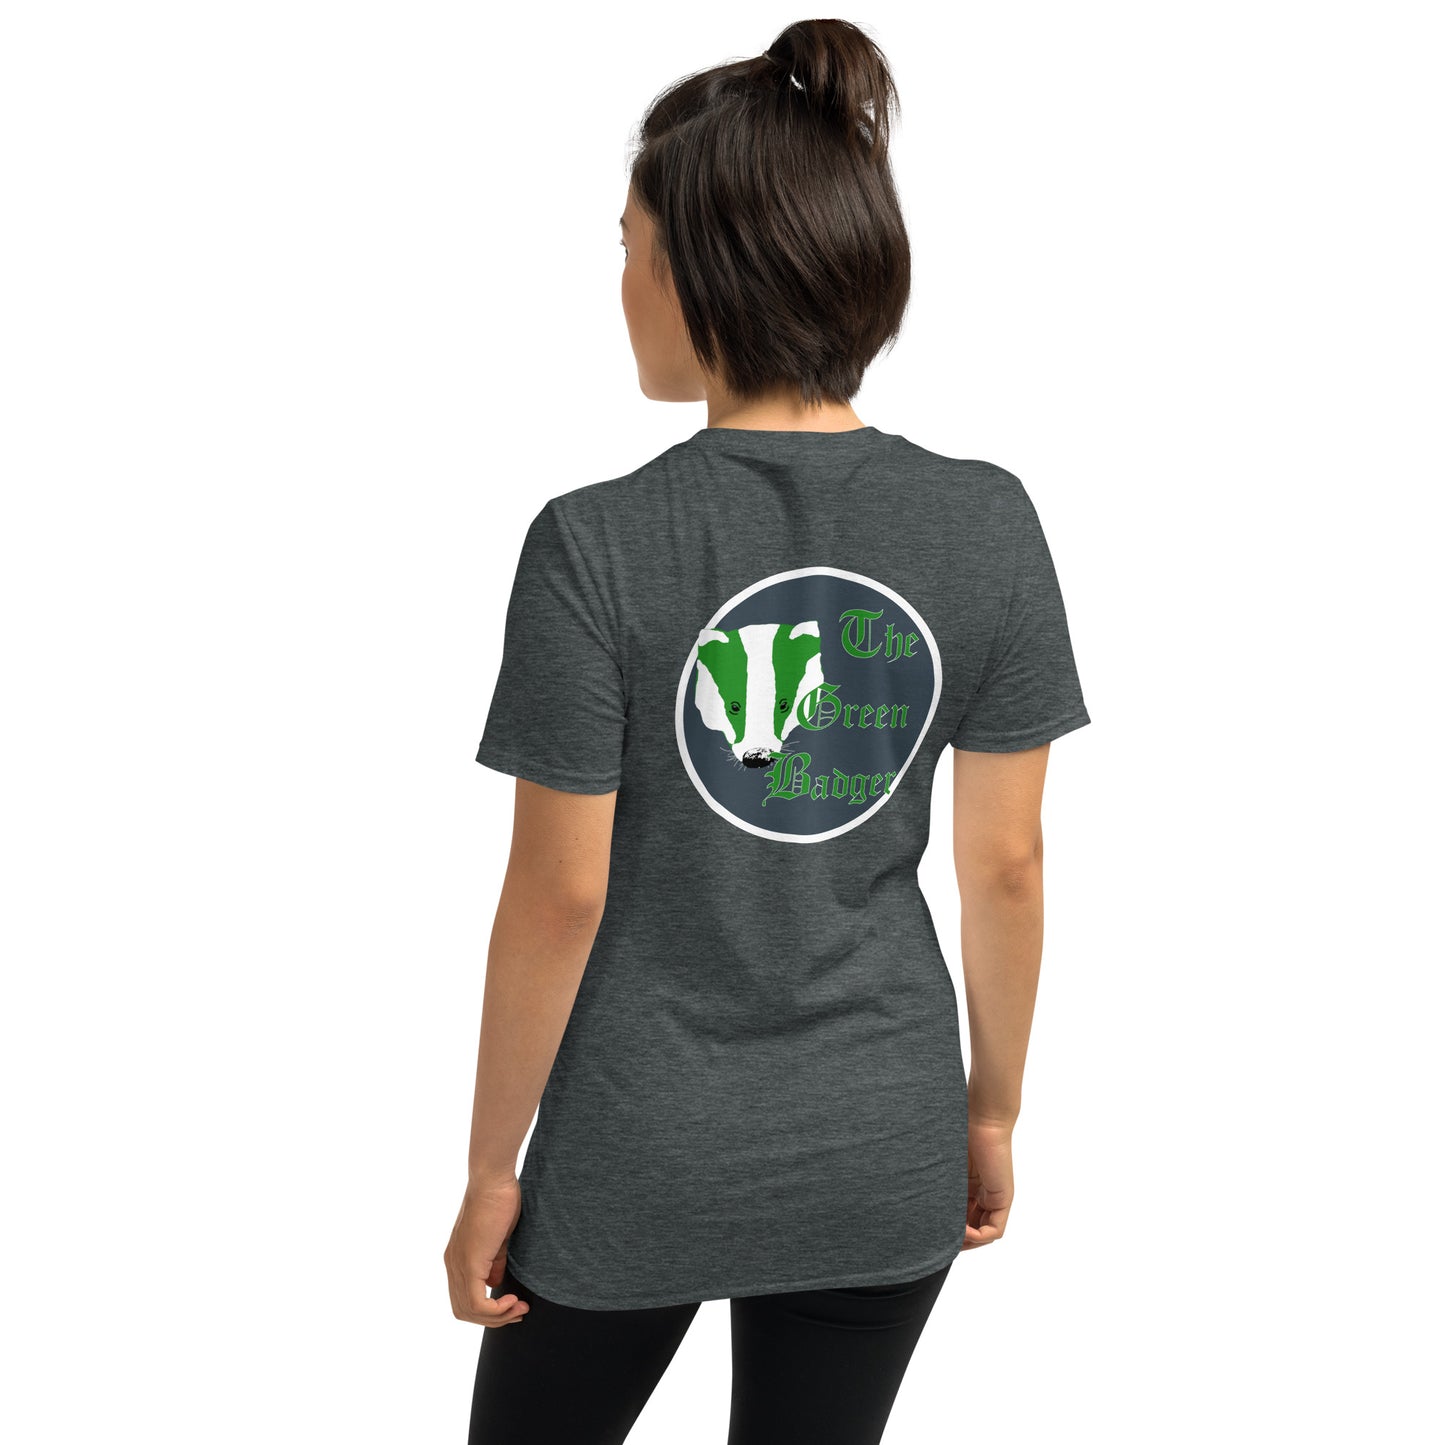 The Green Badger front and back Short-Sleeve Unisex T-Shirt